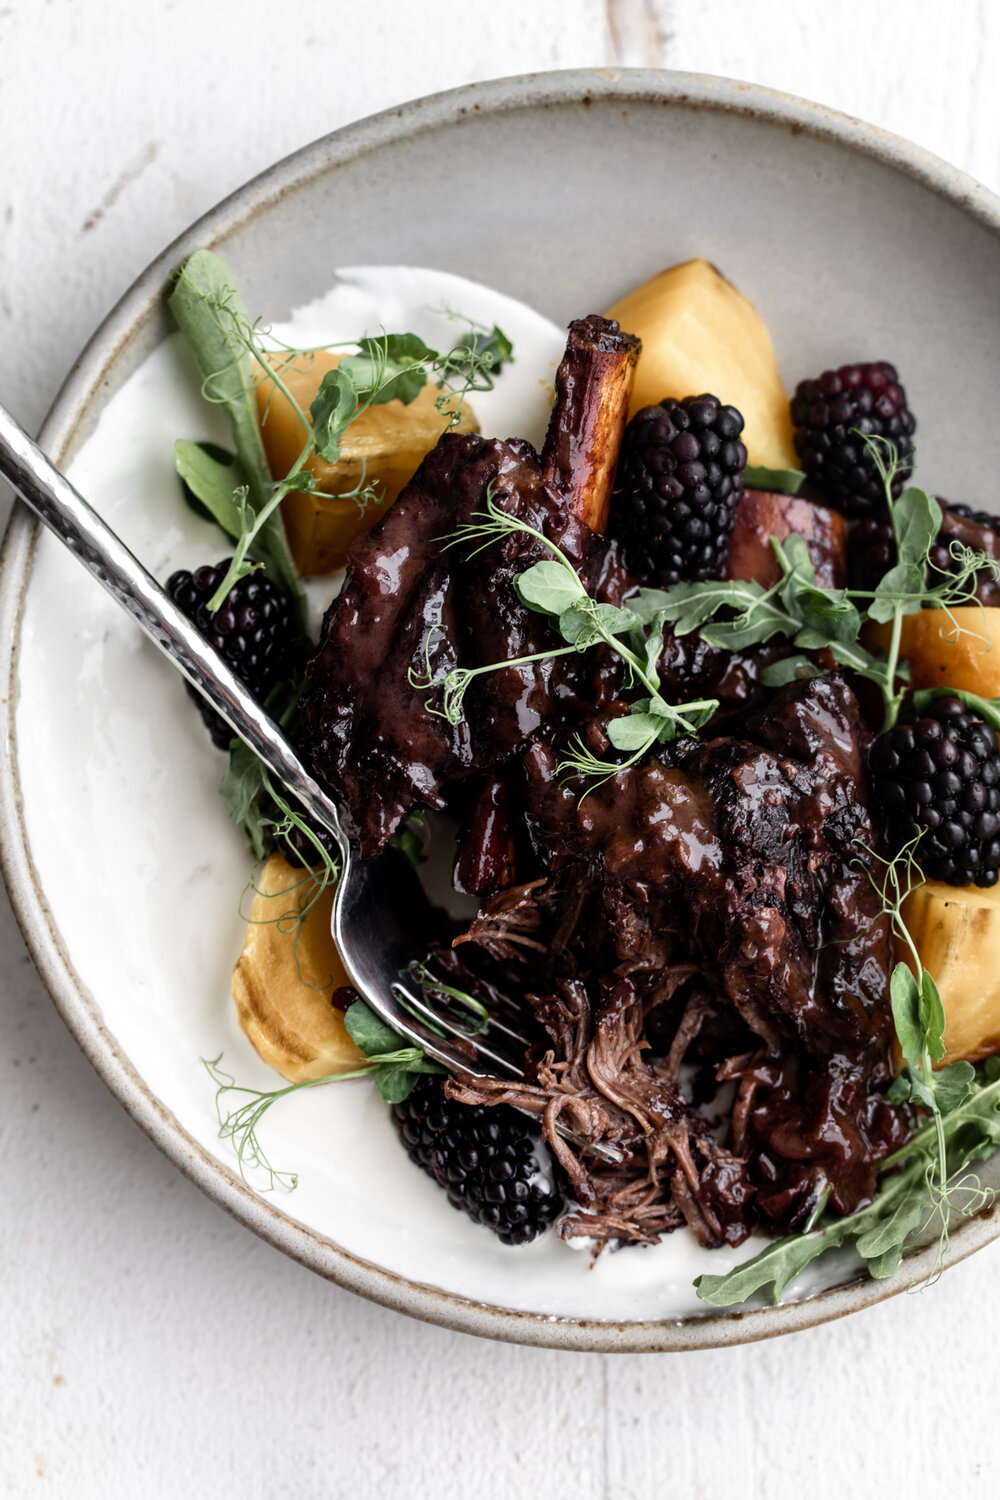 Blackberry Short Ribs with Whipped Ricotta and Roasted Beets-31.jpg